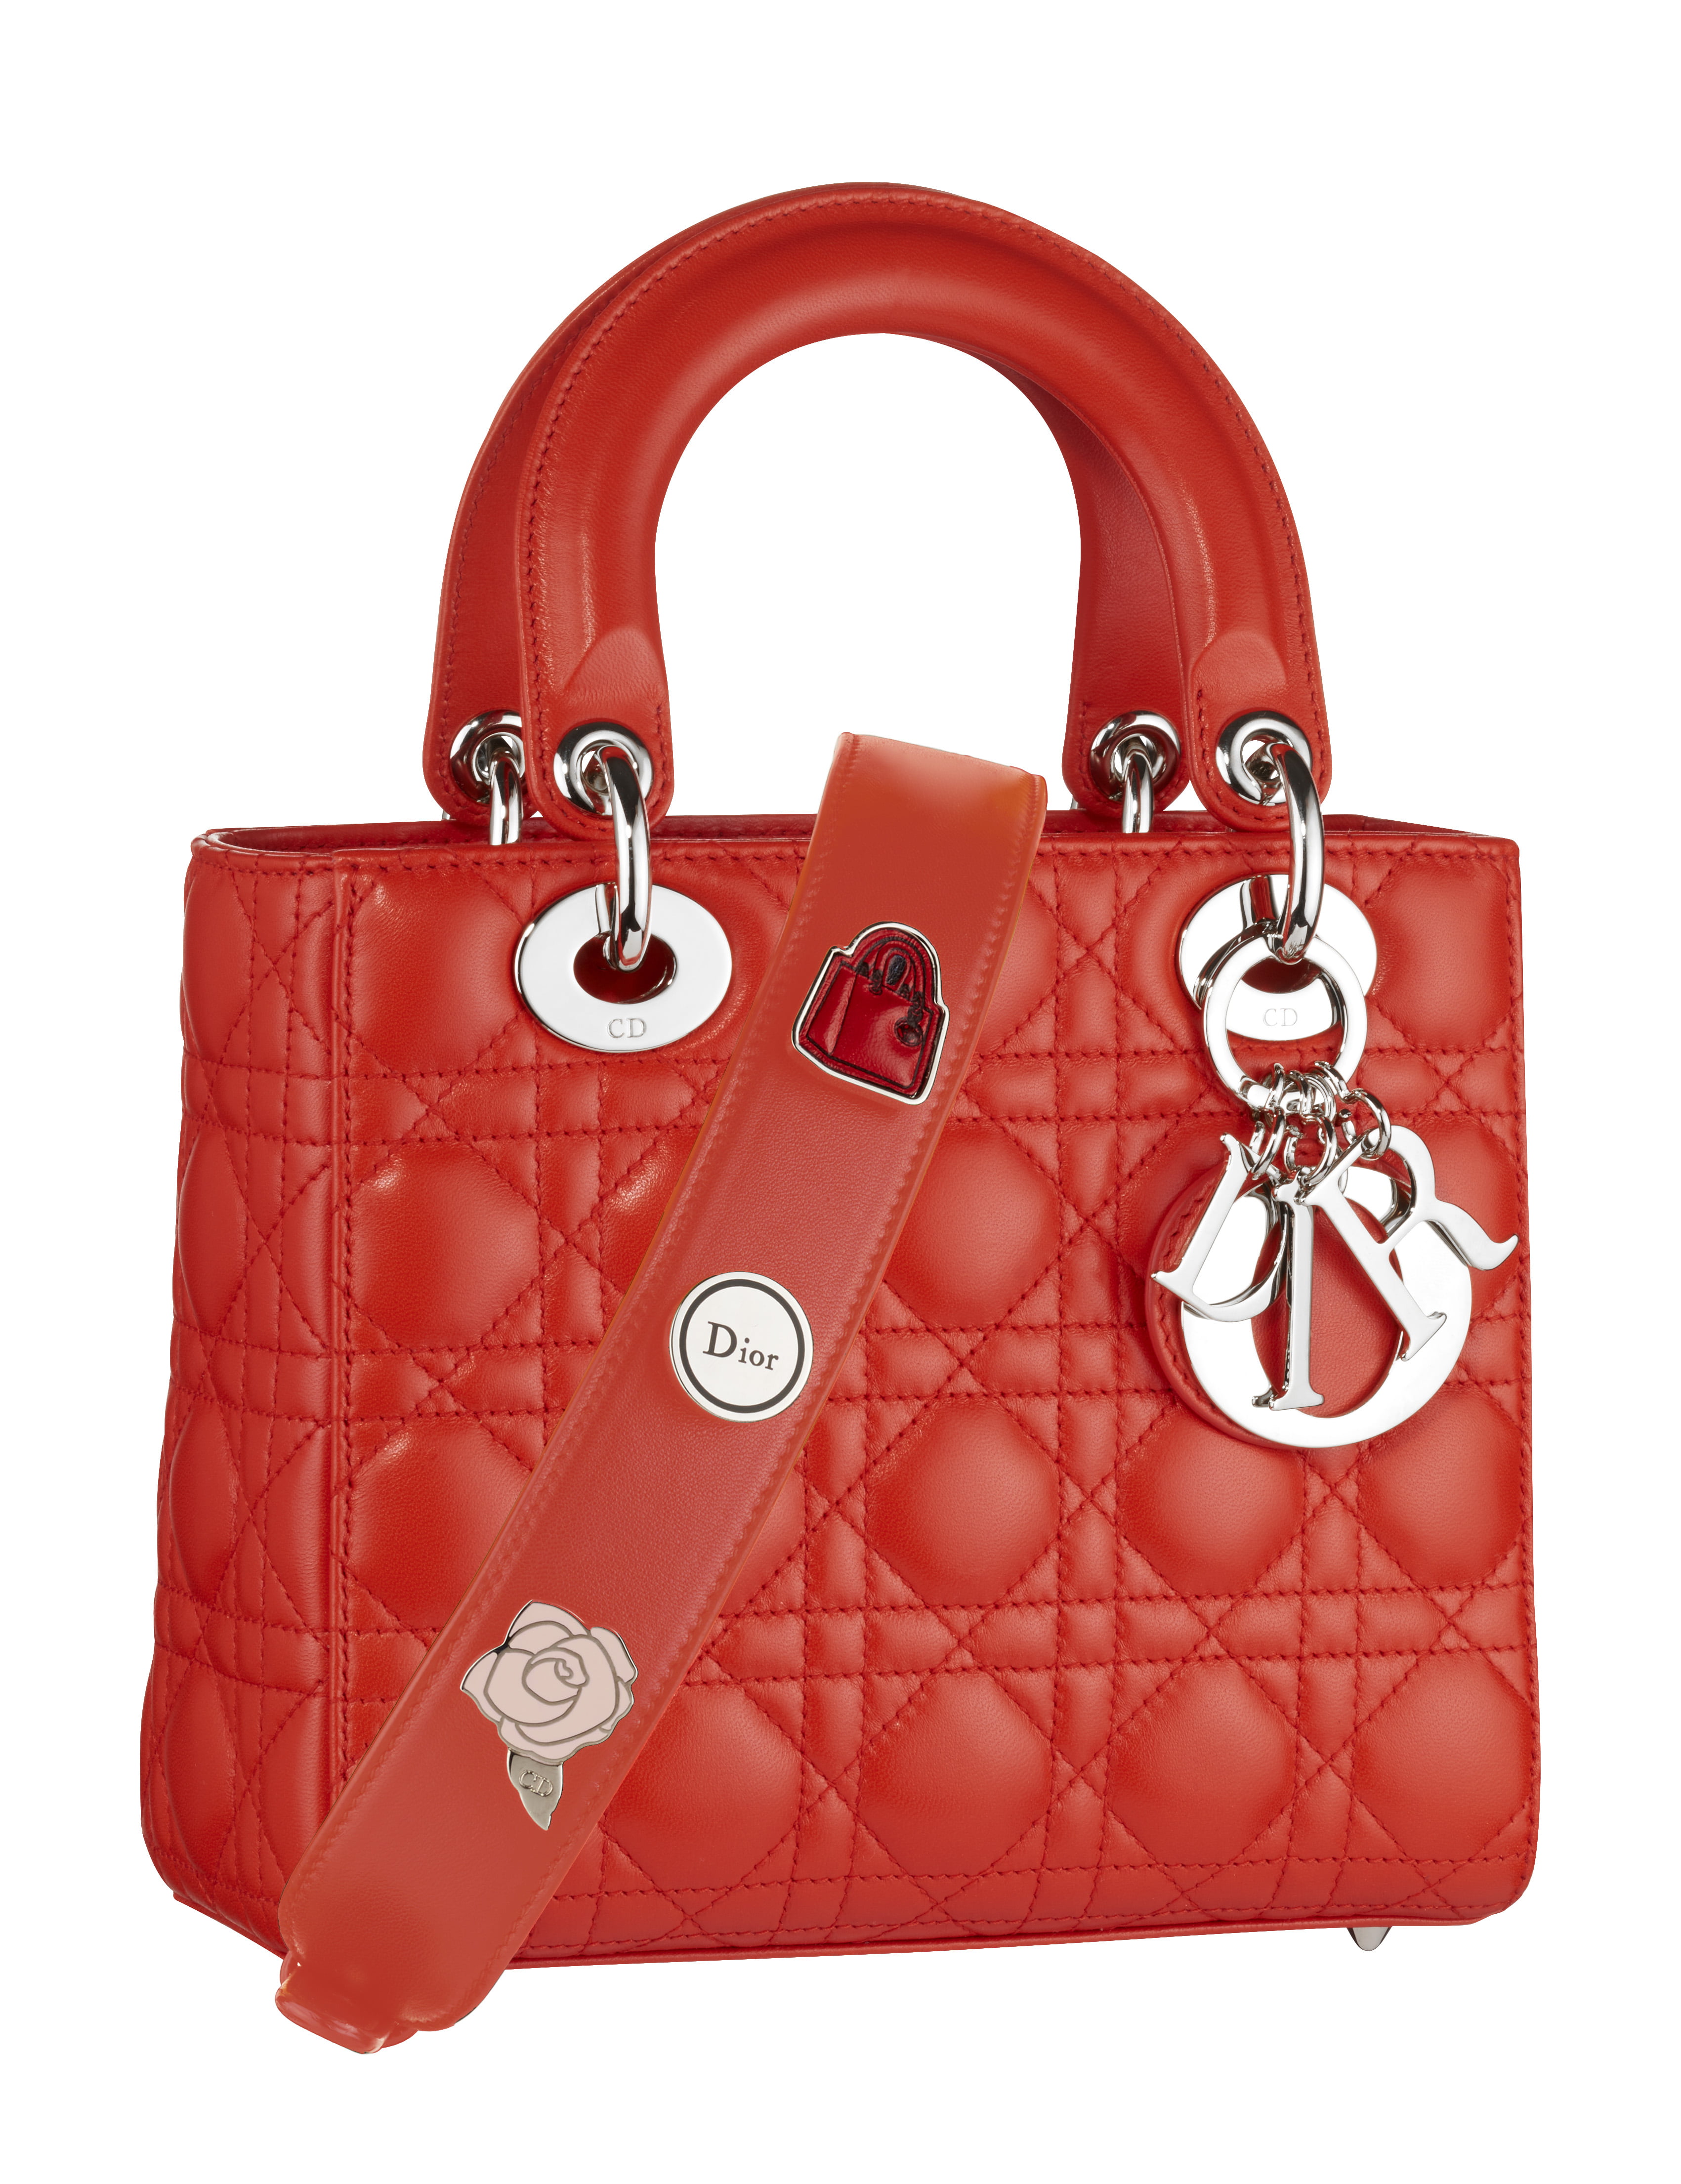 Personalize Your Lady Dior Bag with New Pins - PurseBop